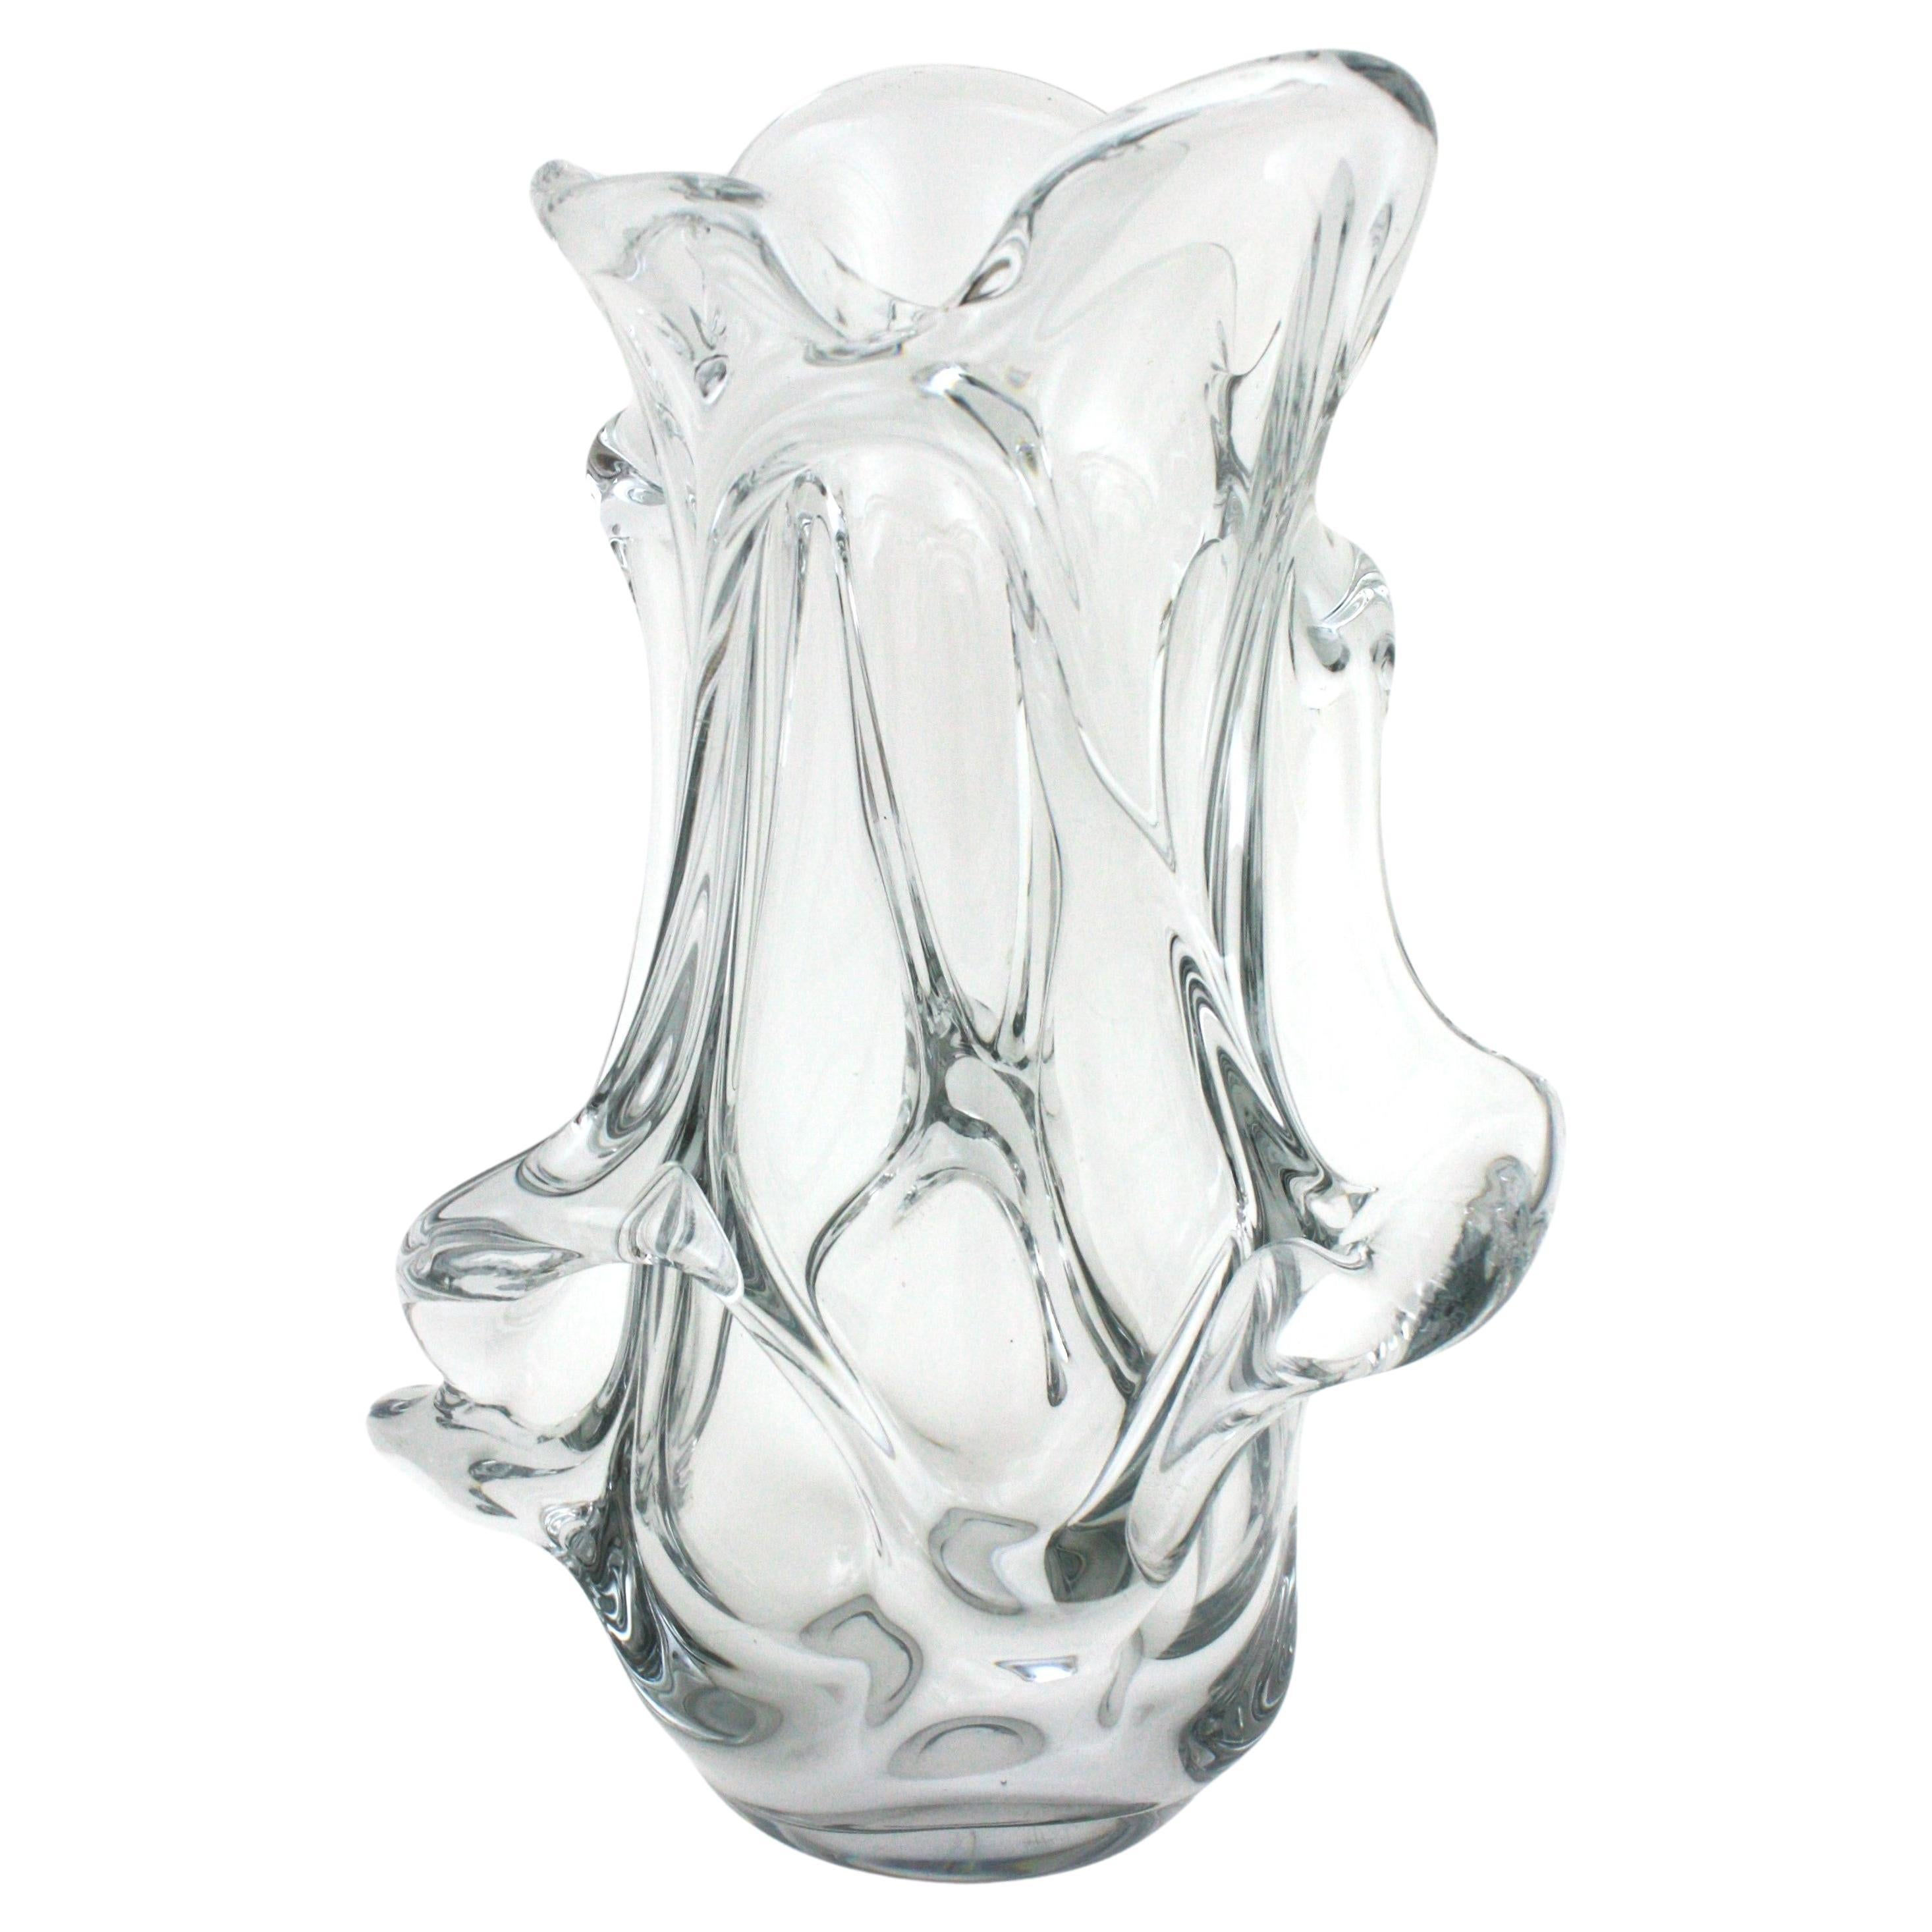 Large Murano Organic Shaped Vase in Clear Glass, 1950s For Sale